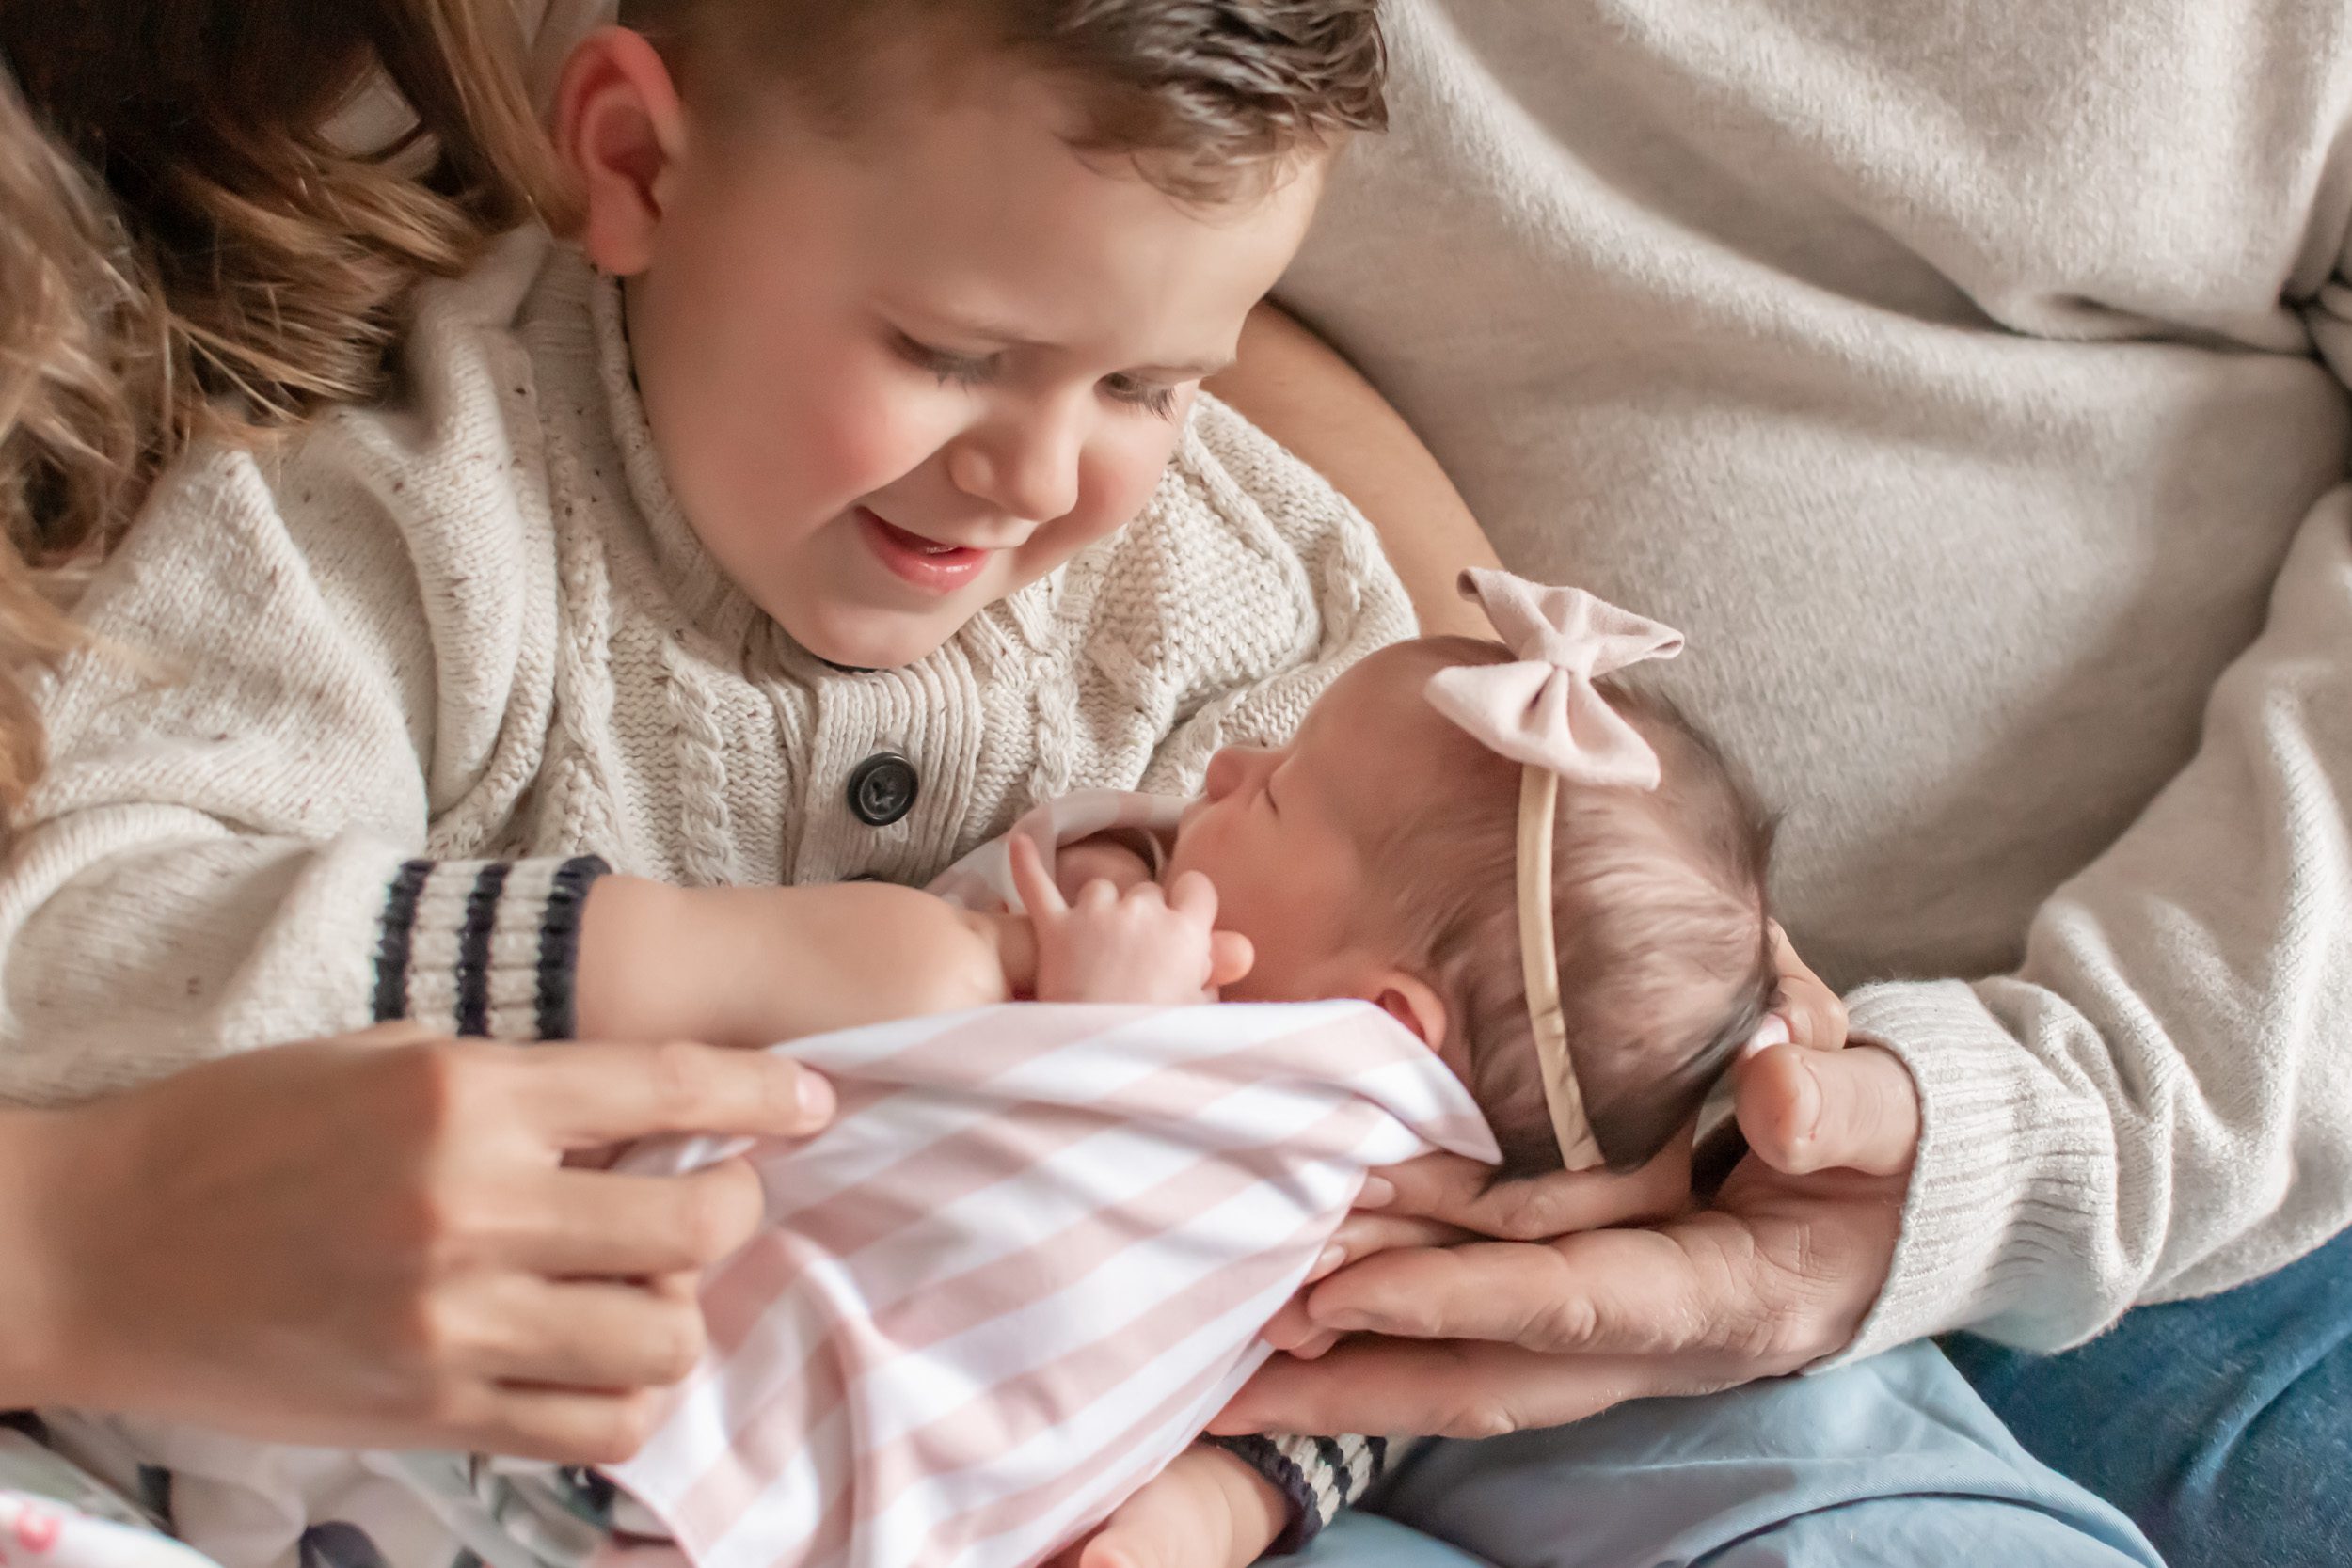 Boy sitting in his parents lap holding his newborn baby sister who is grabbing onto his finger during an in home newborn photography session